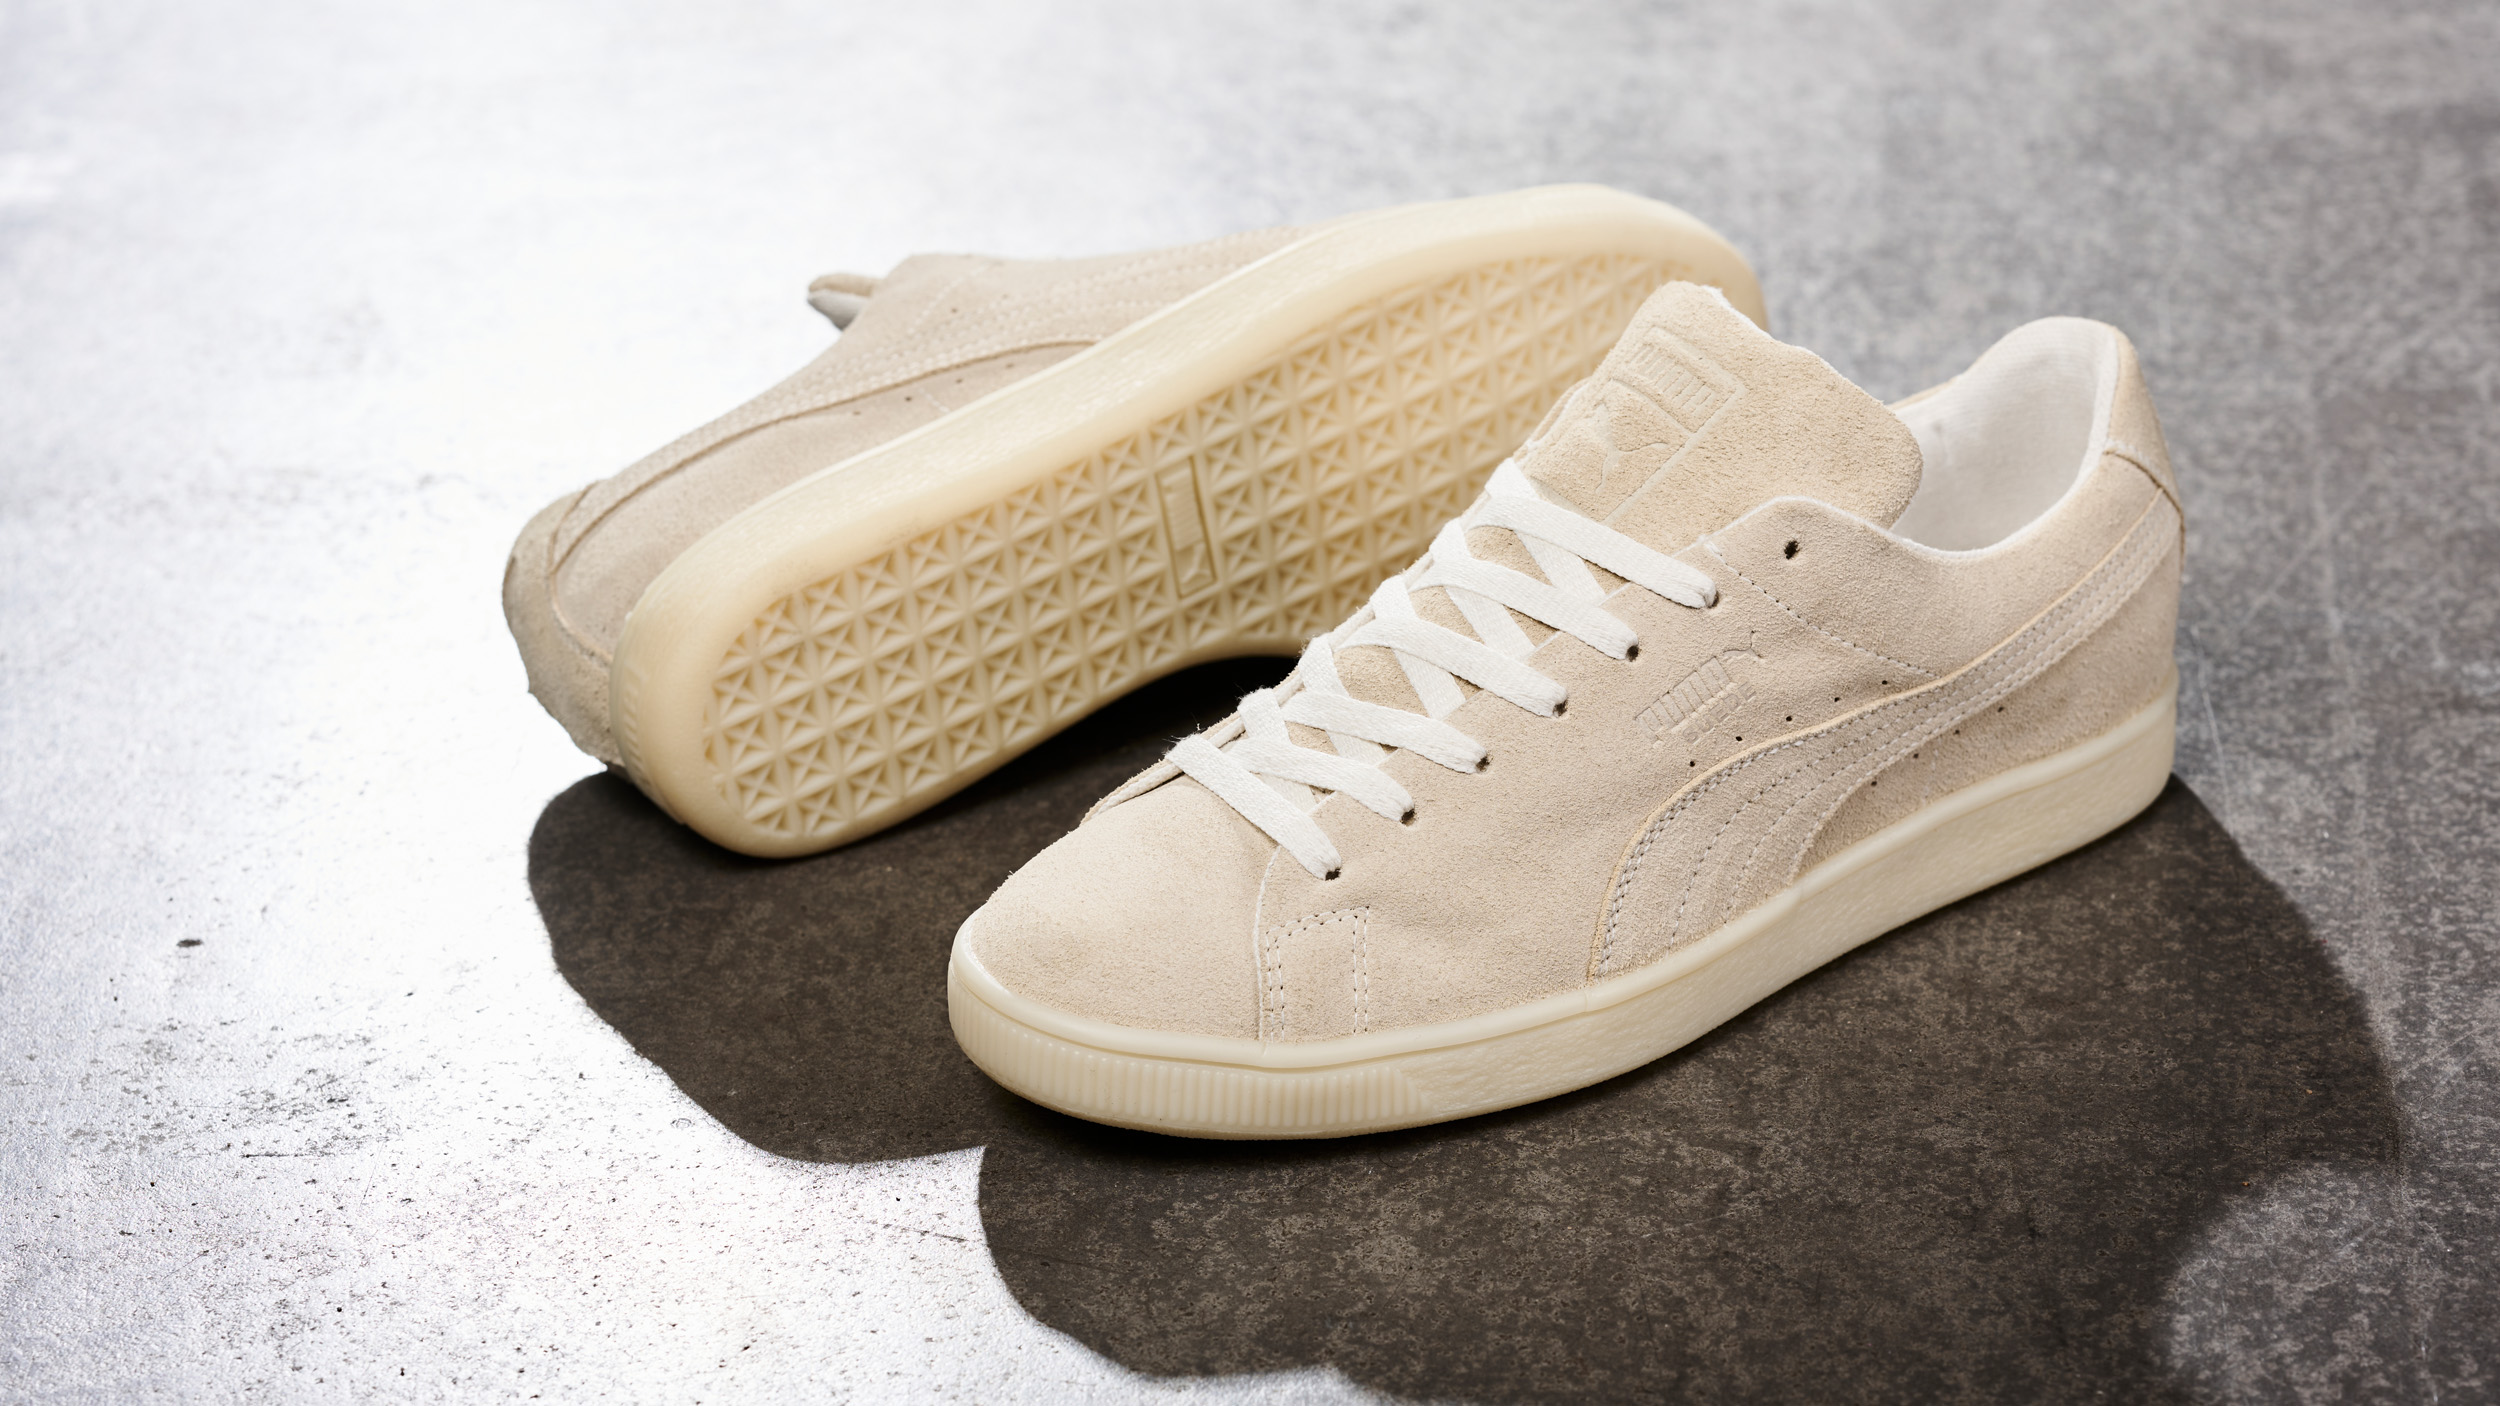 PUMA RE:SUEDE biodegradable and sustainable sneaker